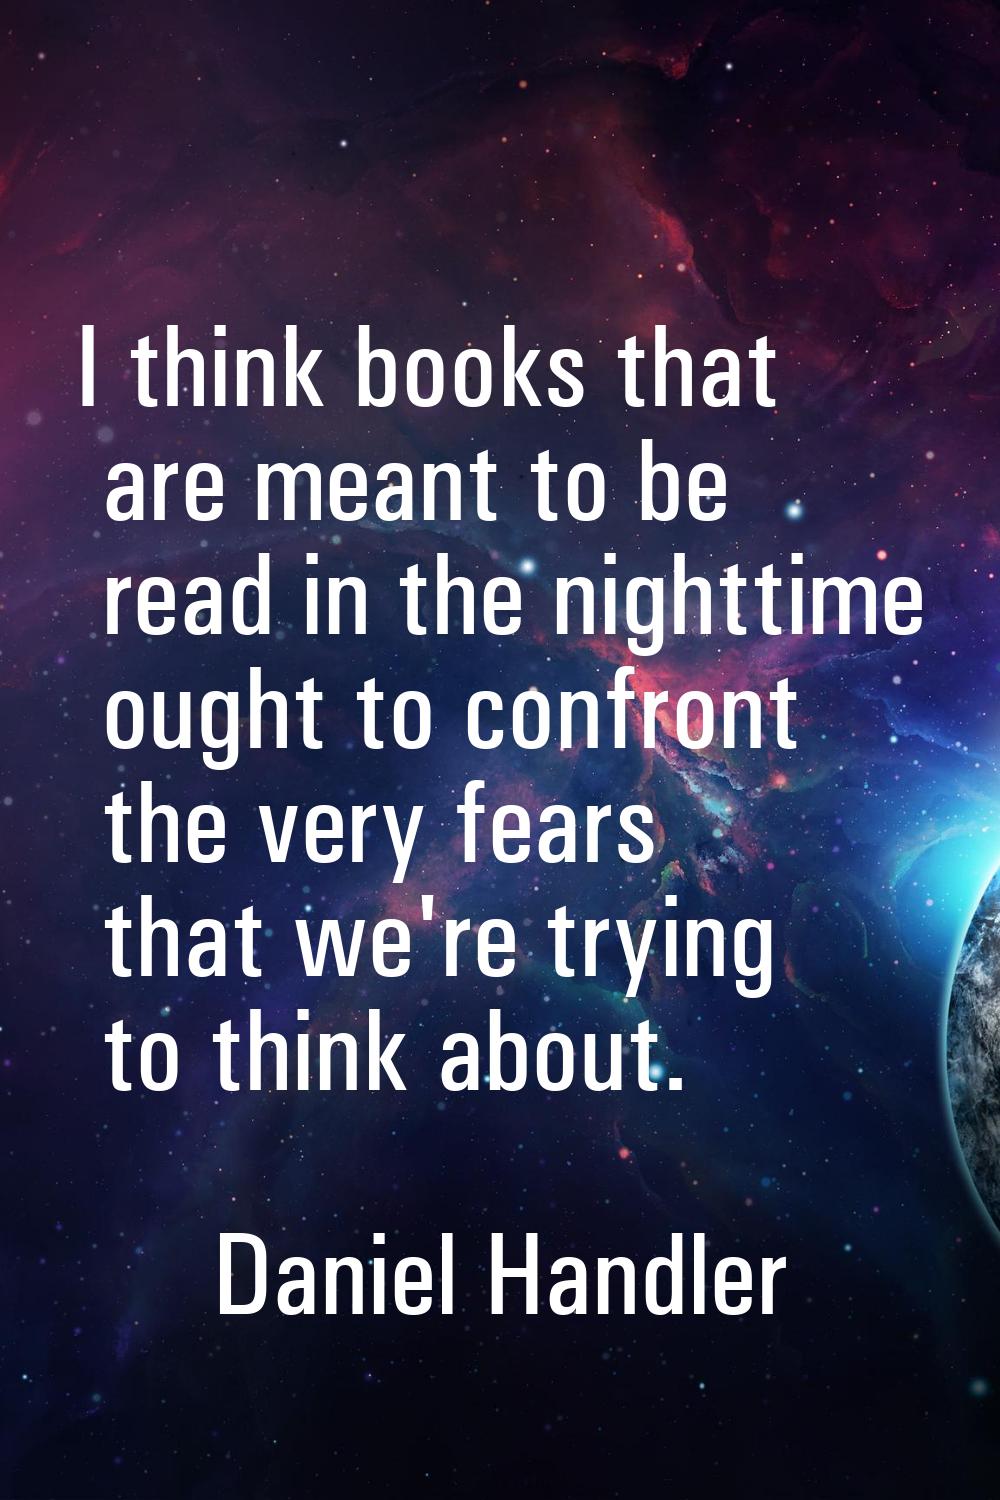 I think books that are meant to be read in the nighttime ought to confront the very fears that we'r